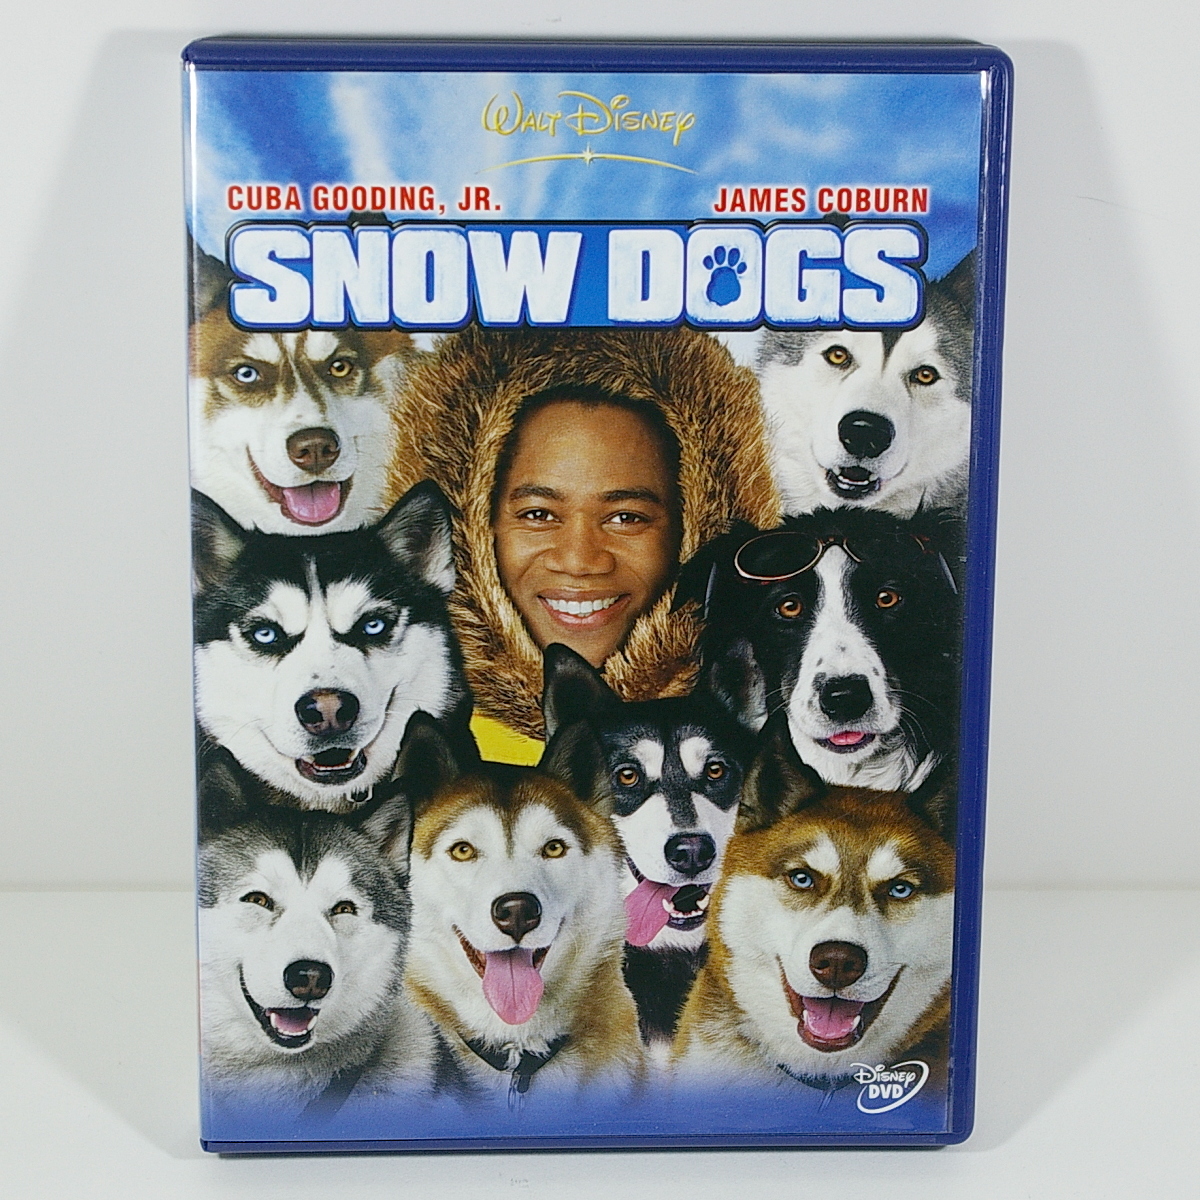  snow * dog (..:Snow Dogs) [ direction : Brian *re van to] <2002 year | America > exhibition control B